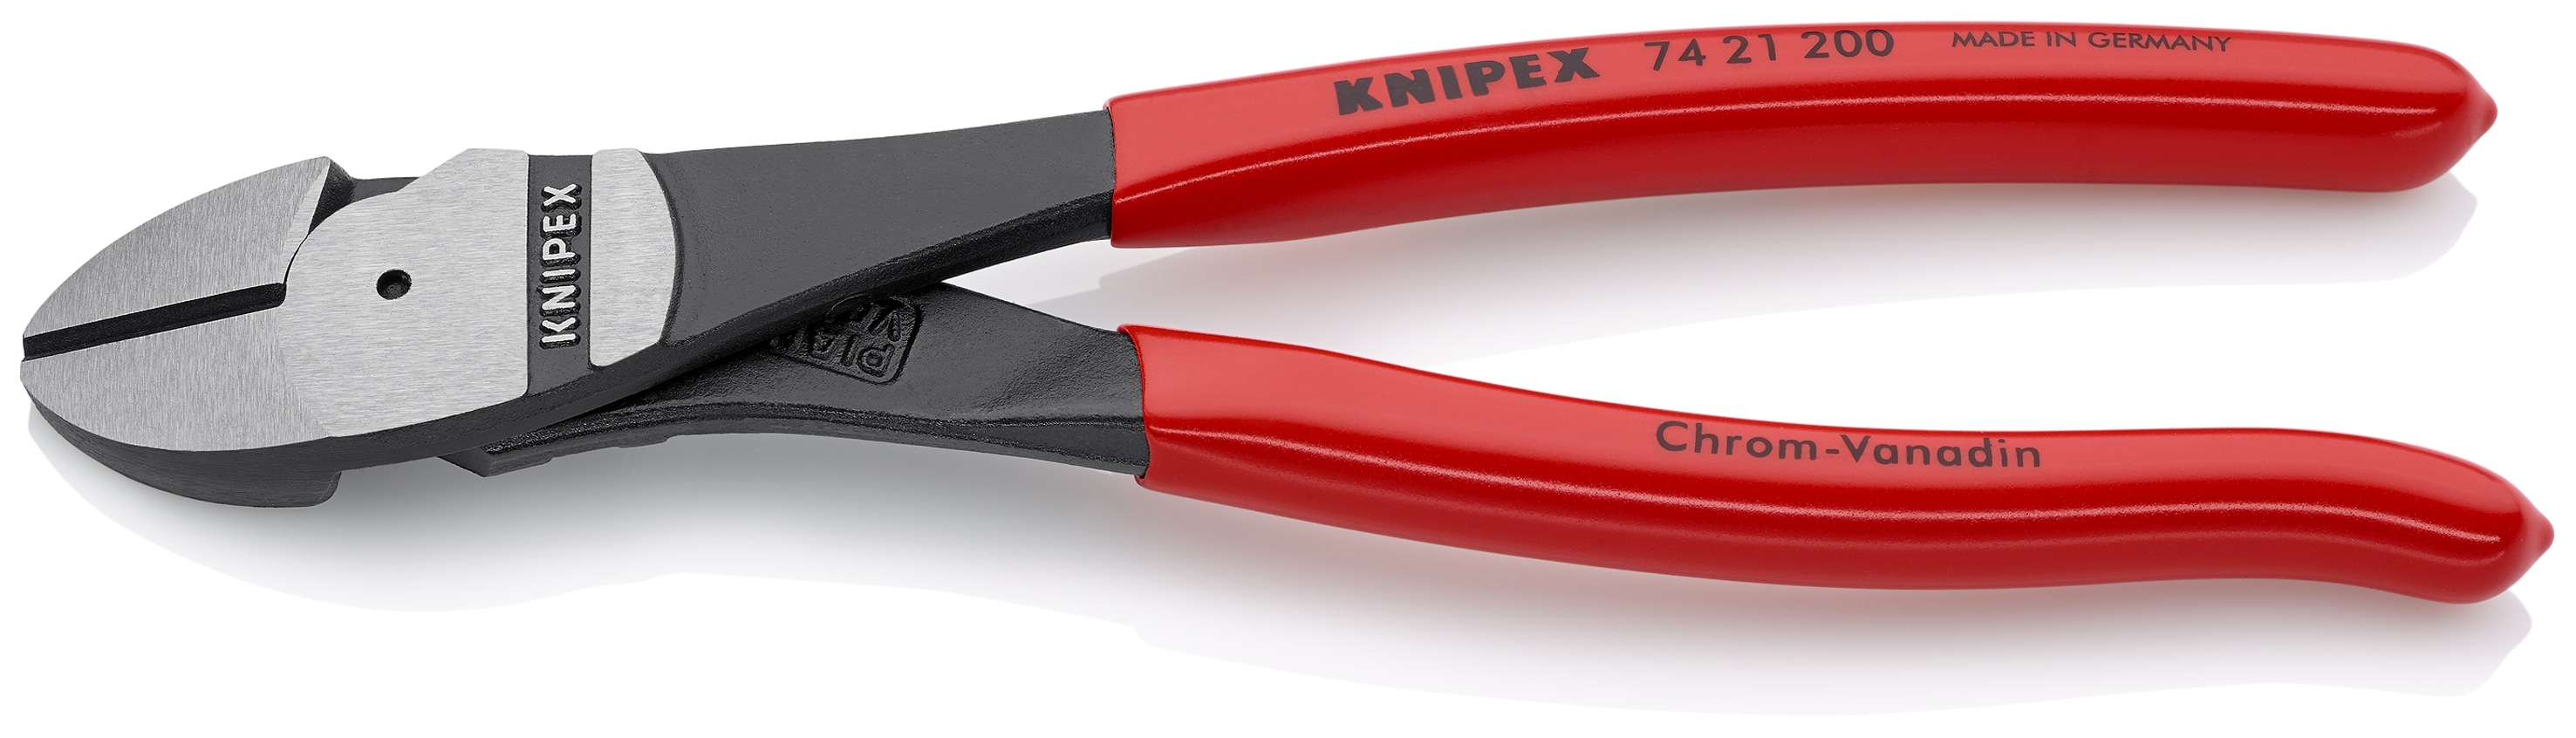 End Cutting Pliers 6 Nail Nippers Puller Plier with PVC Handle